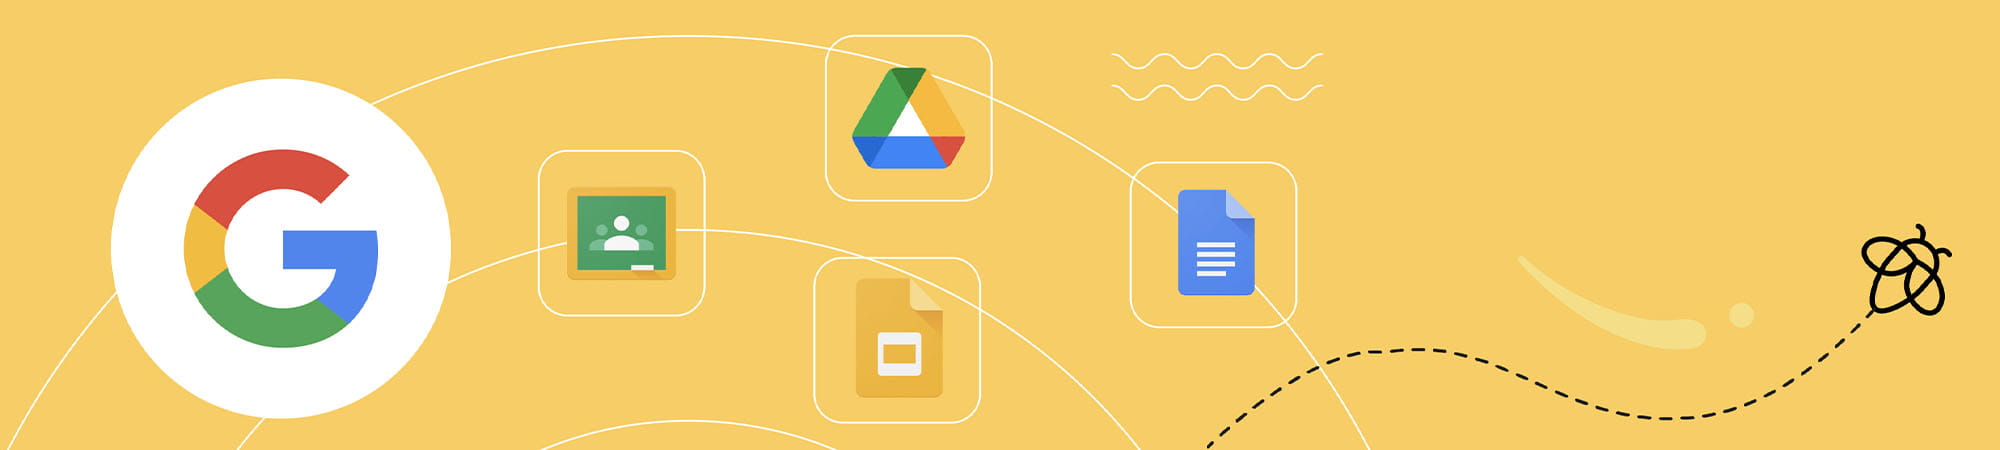 Graphic showing Lumio's integration with Google, highlighted by a network connecting the Google logo to icons for Google Drive, Google Slides, and a document.